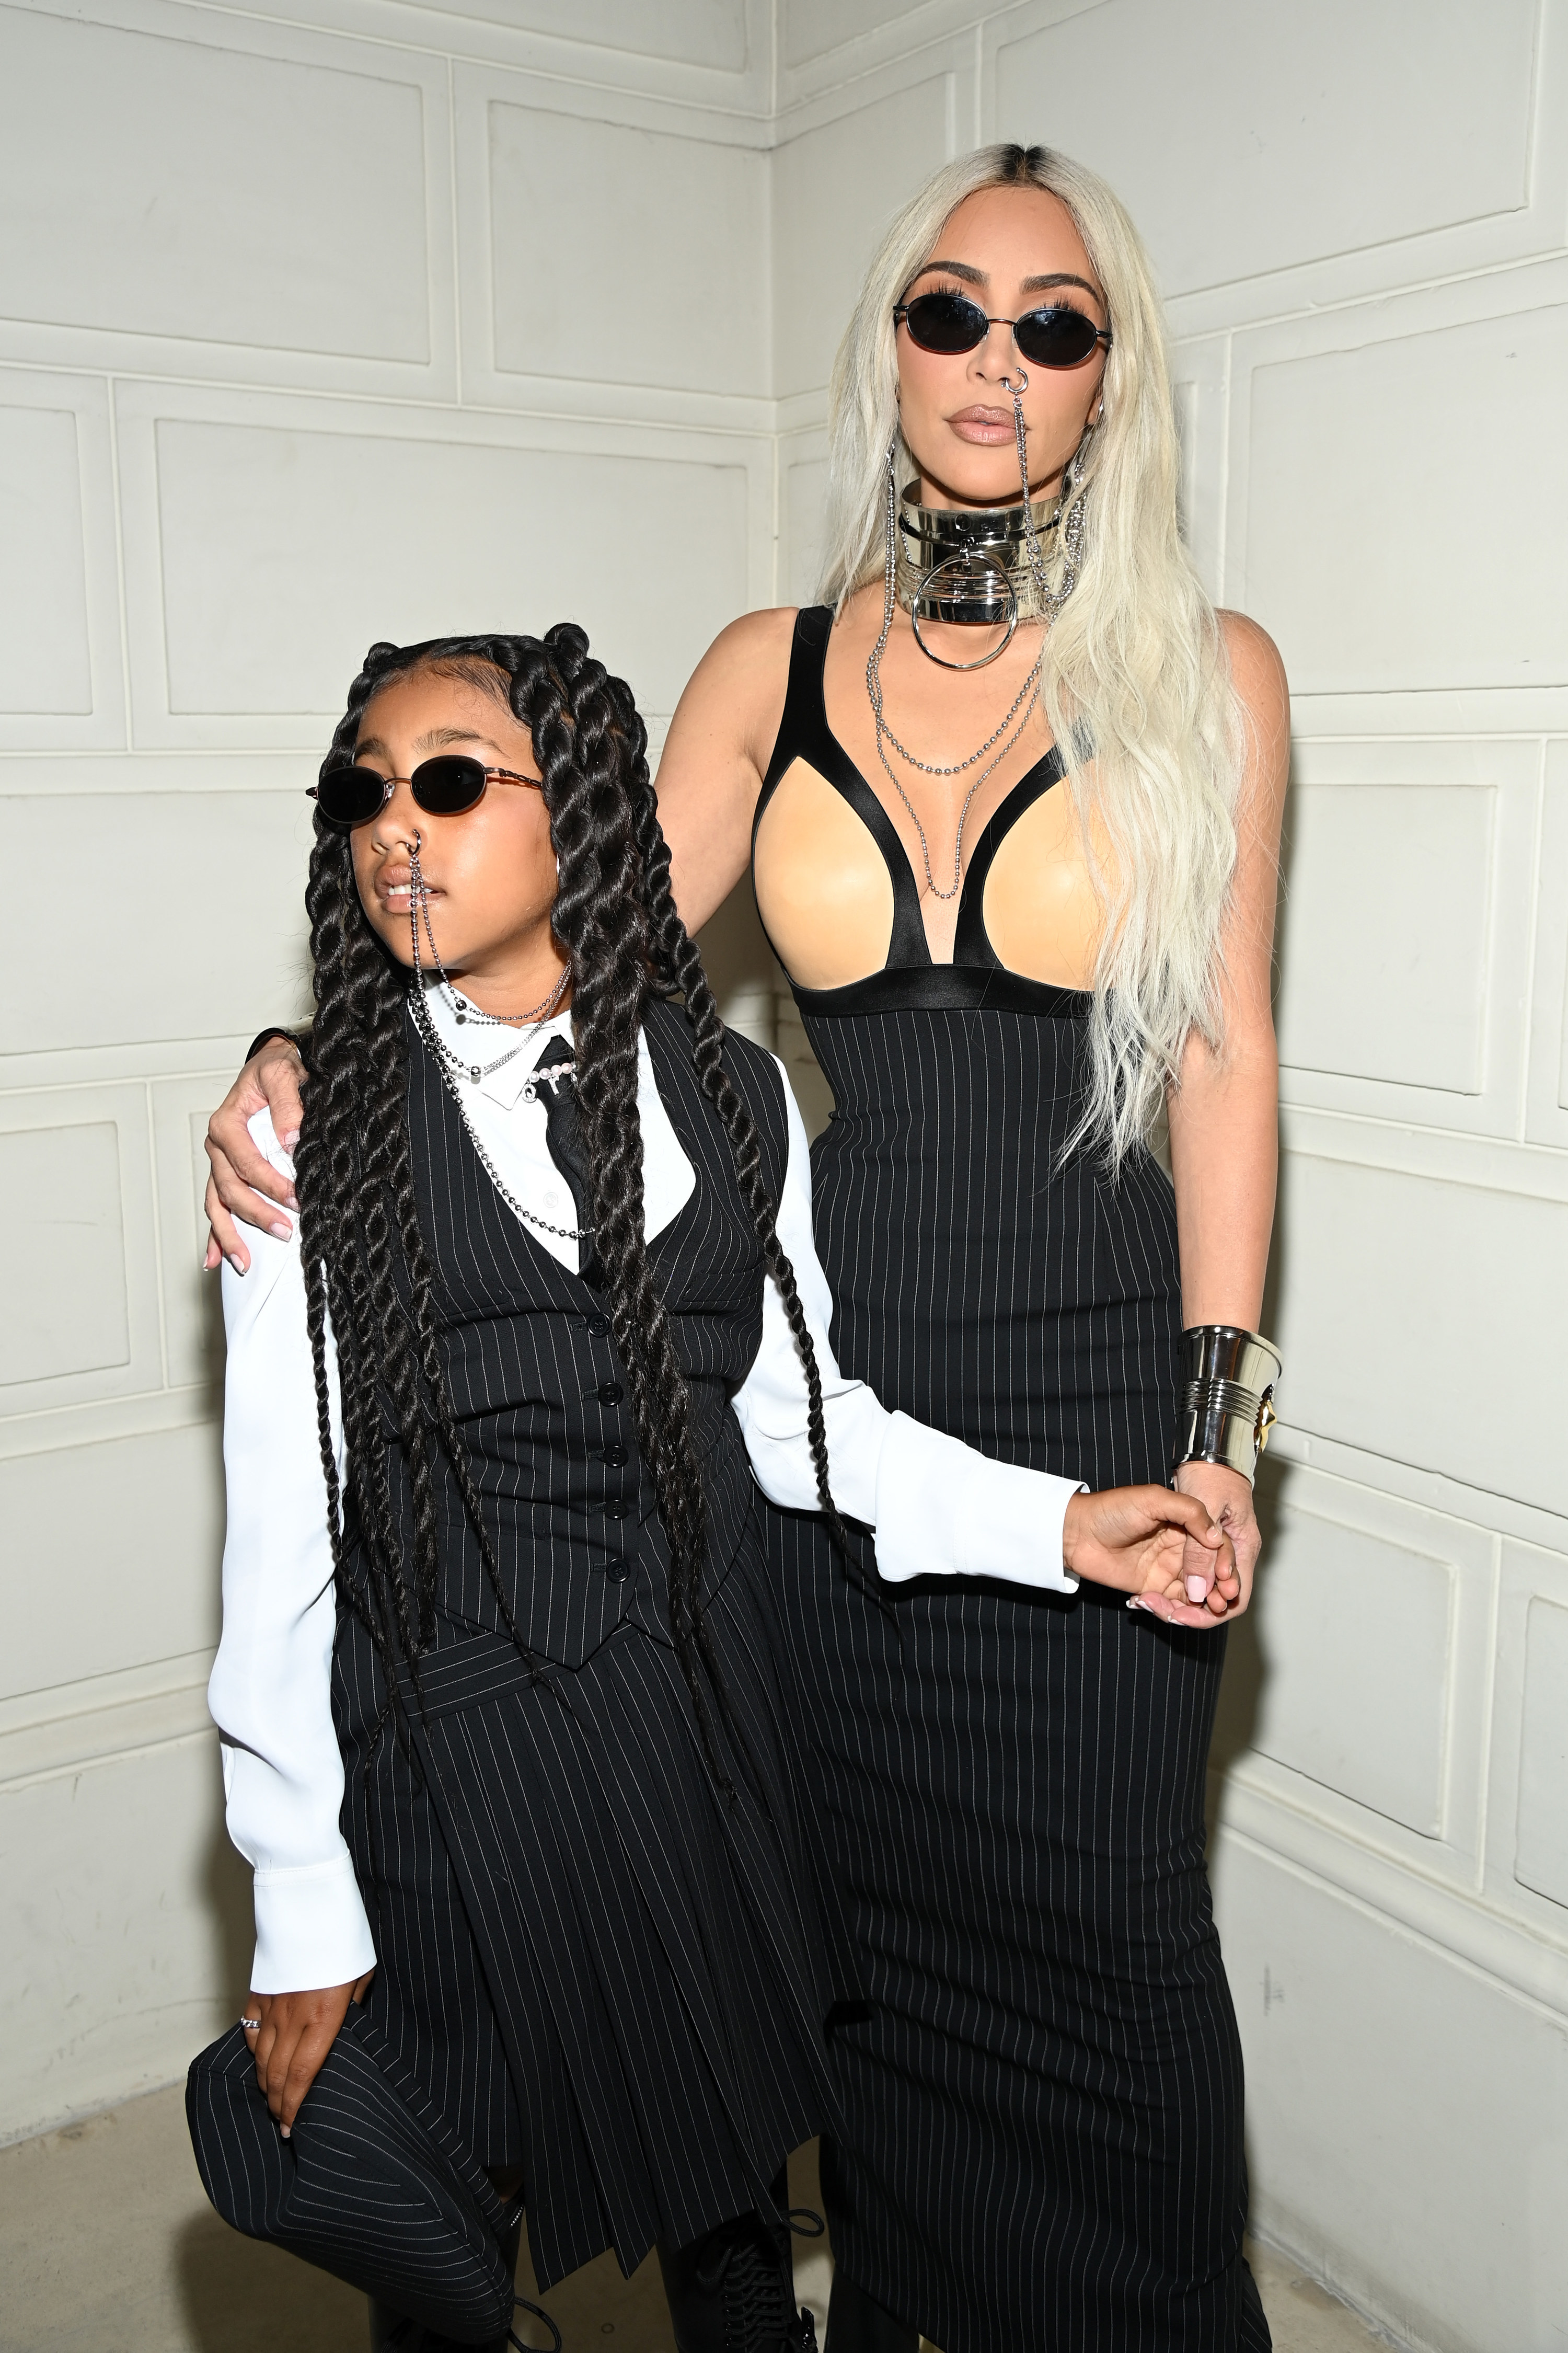 North and Kim in pin-striped outfits